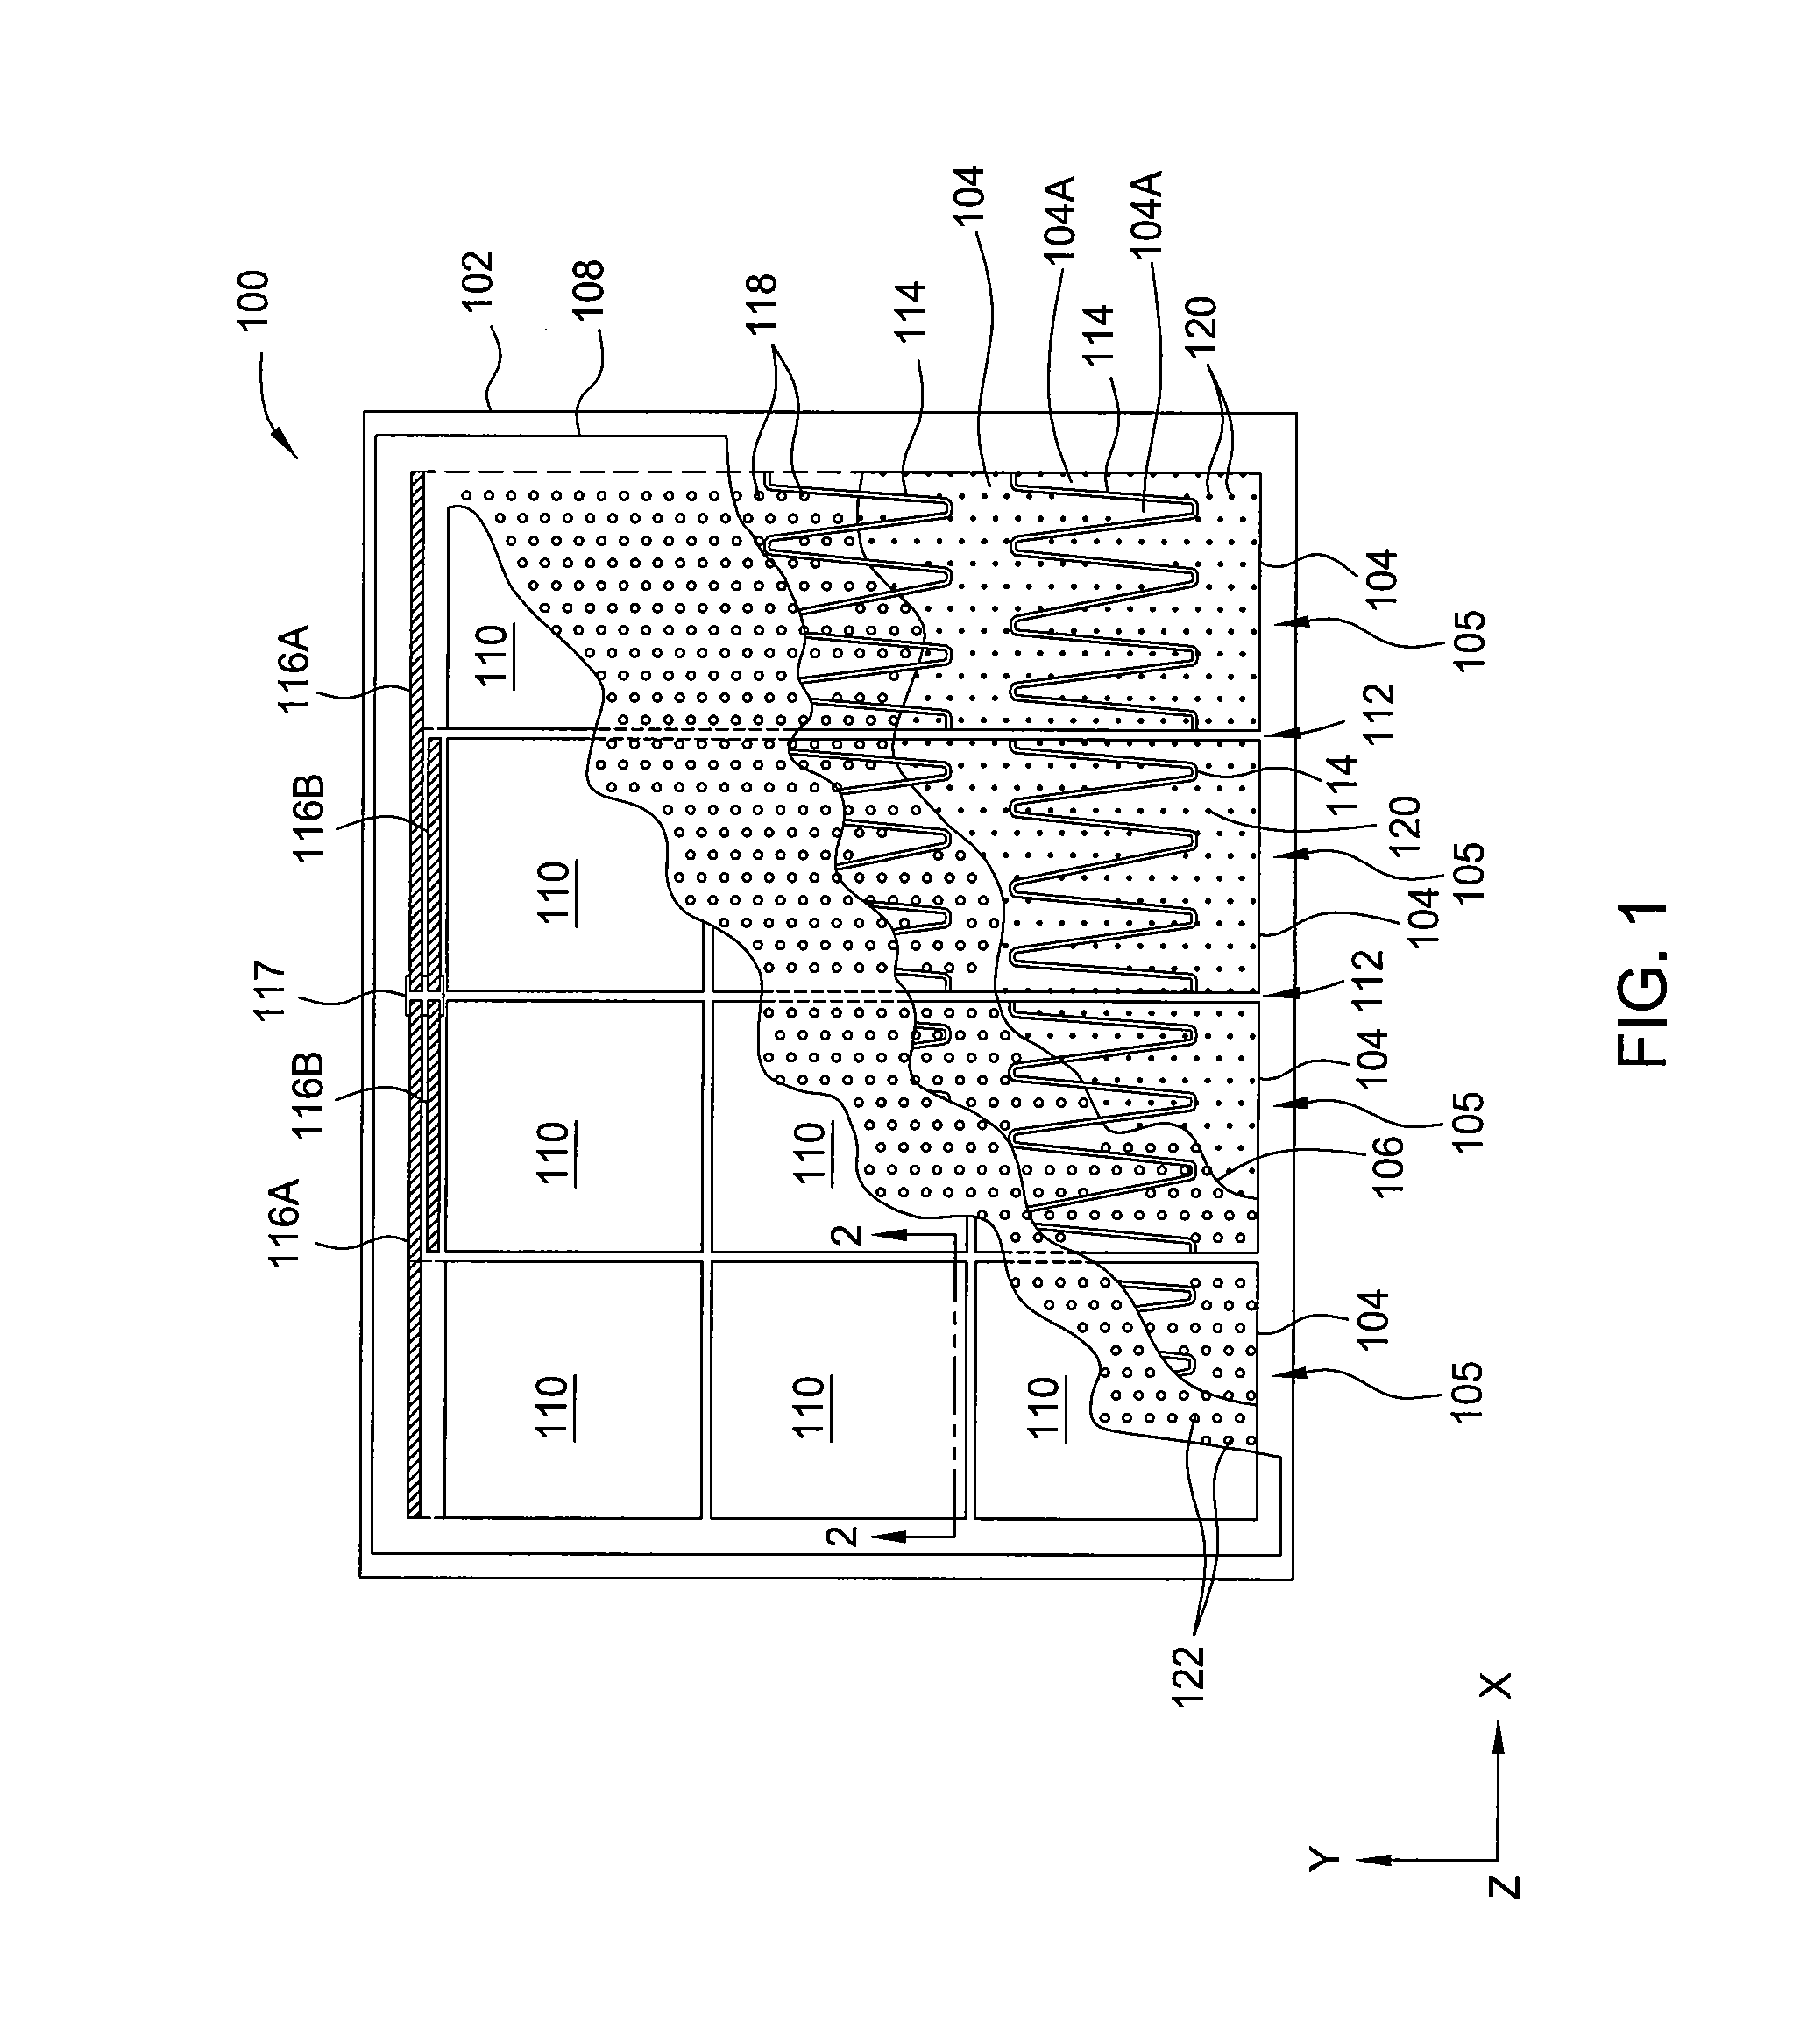 Conductive foils having multiple layers and methods of forming same